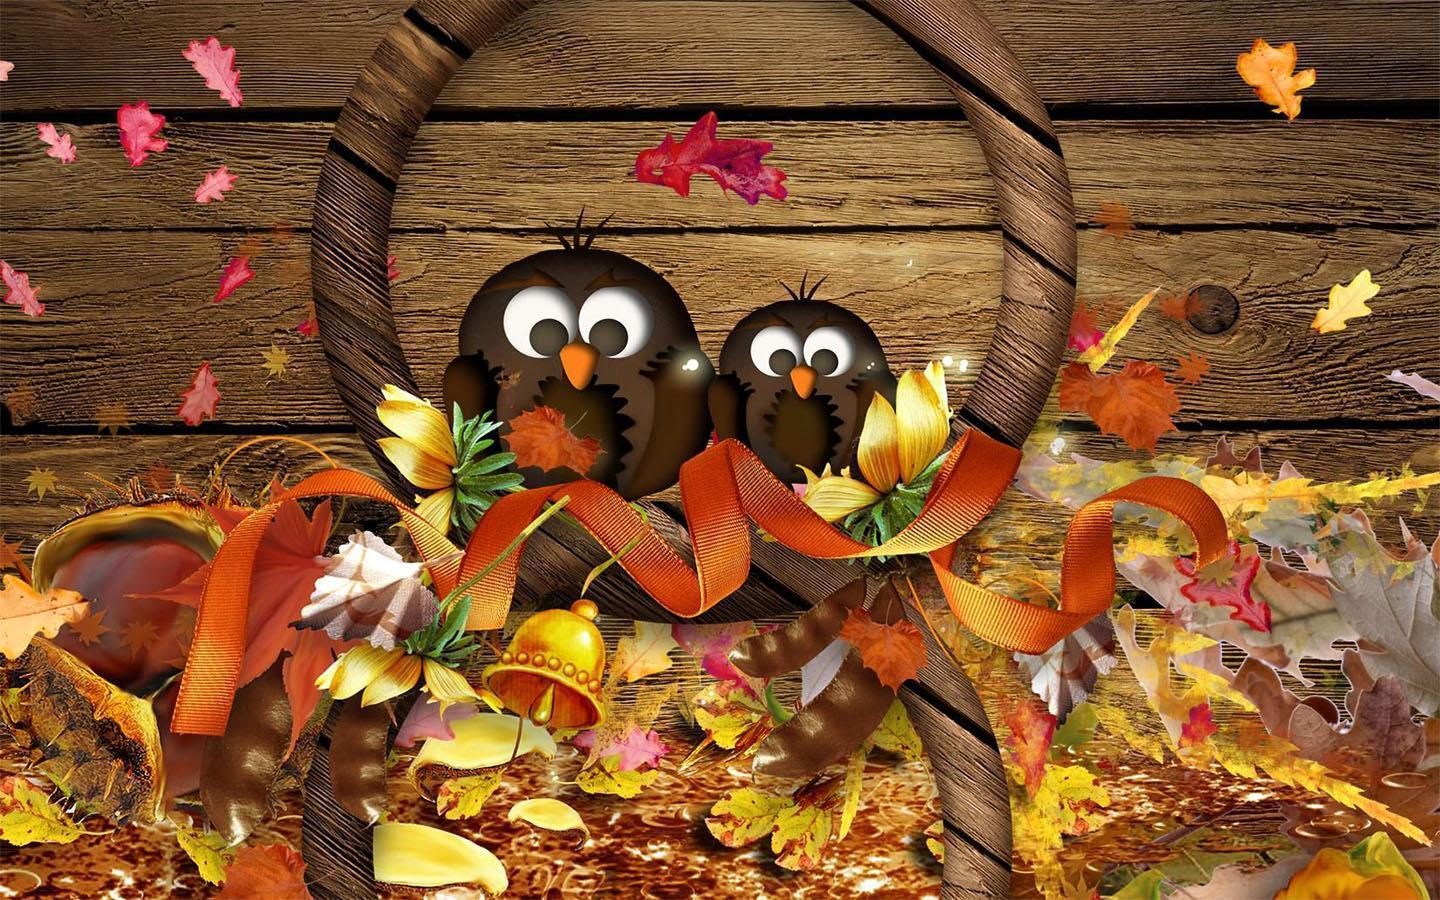 3D Thanksgiving Wallpaper for Android